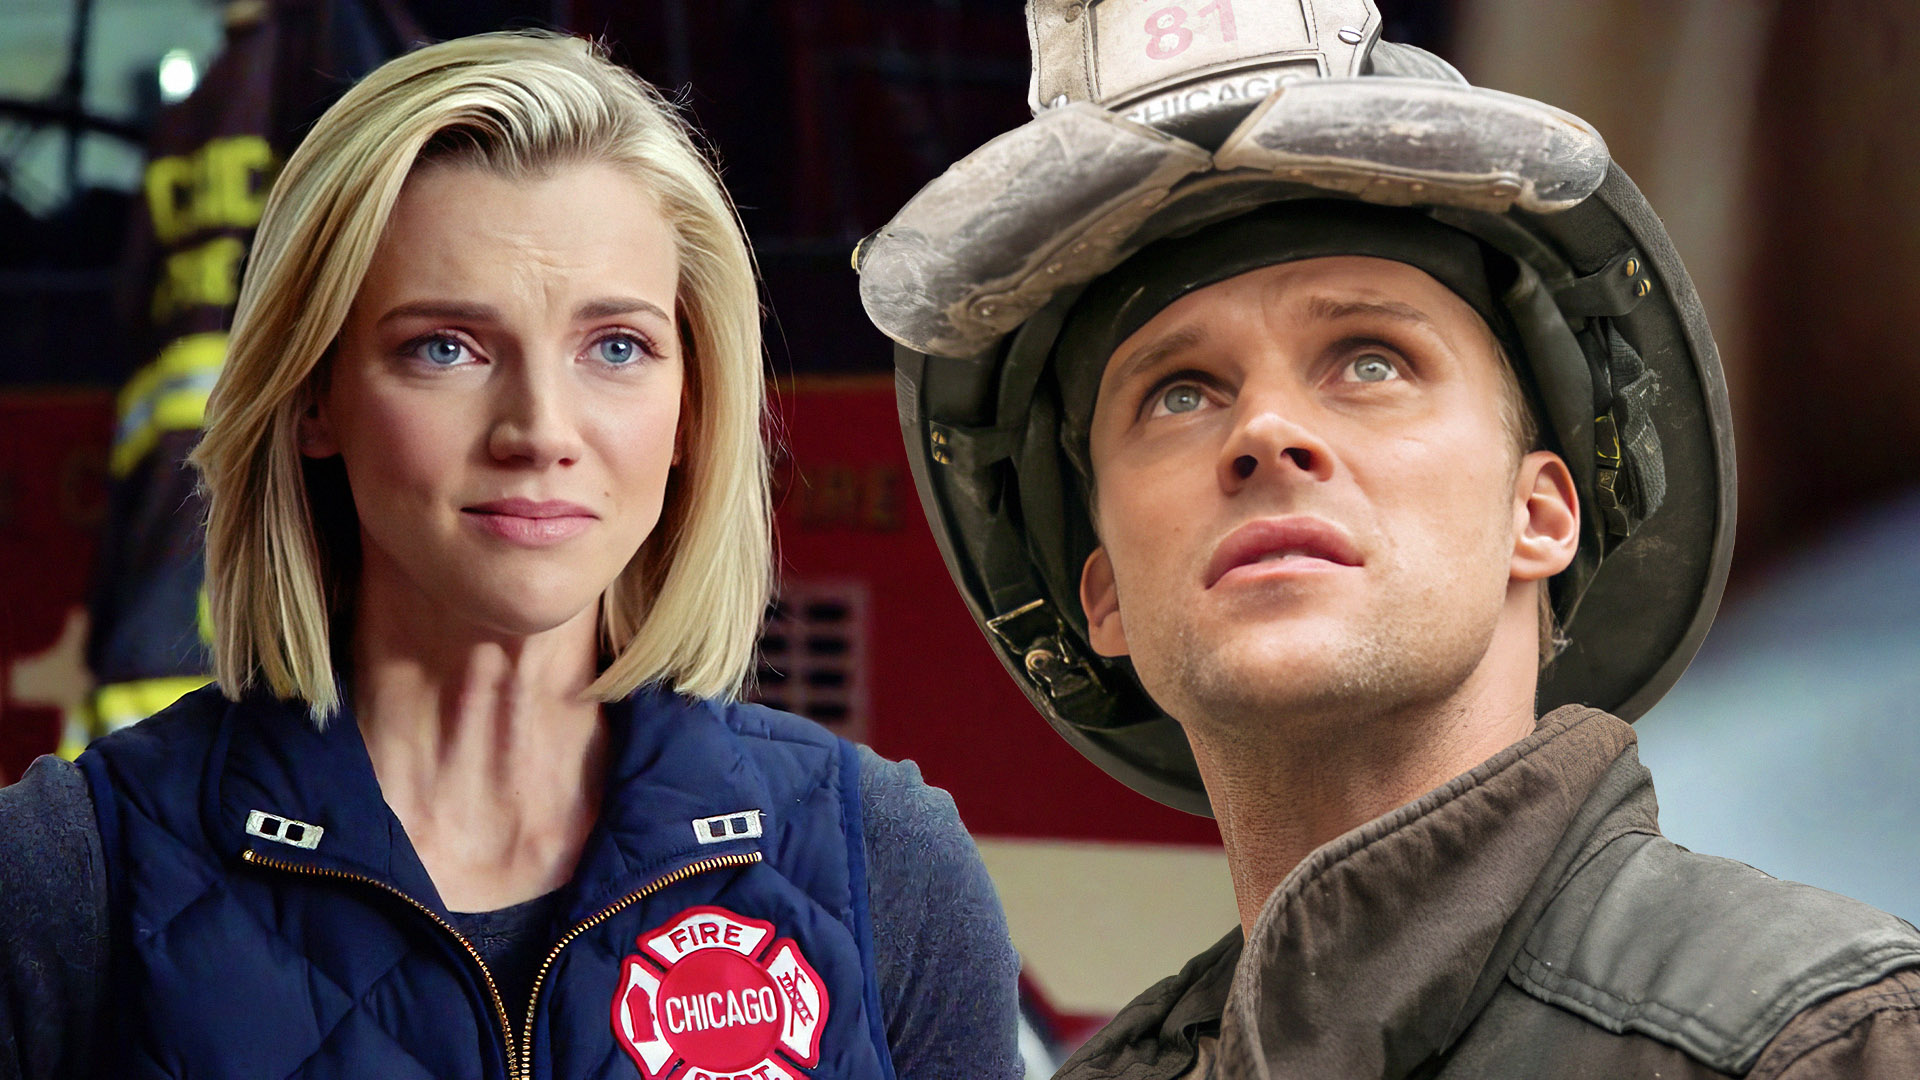 The Most Wholesome Writing-Off on TV: Kara Killmer's Exit from Chicago Fire Was 'Perfect', the Actress Says